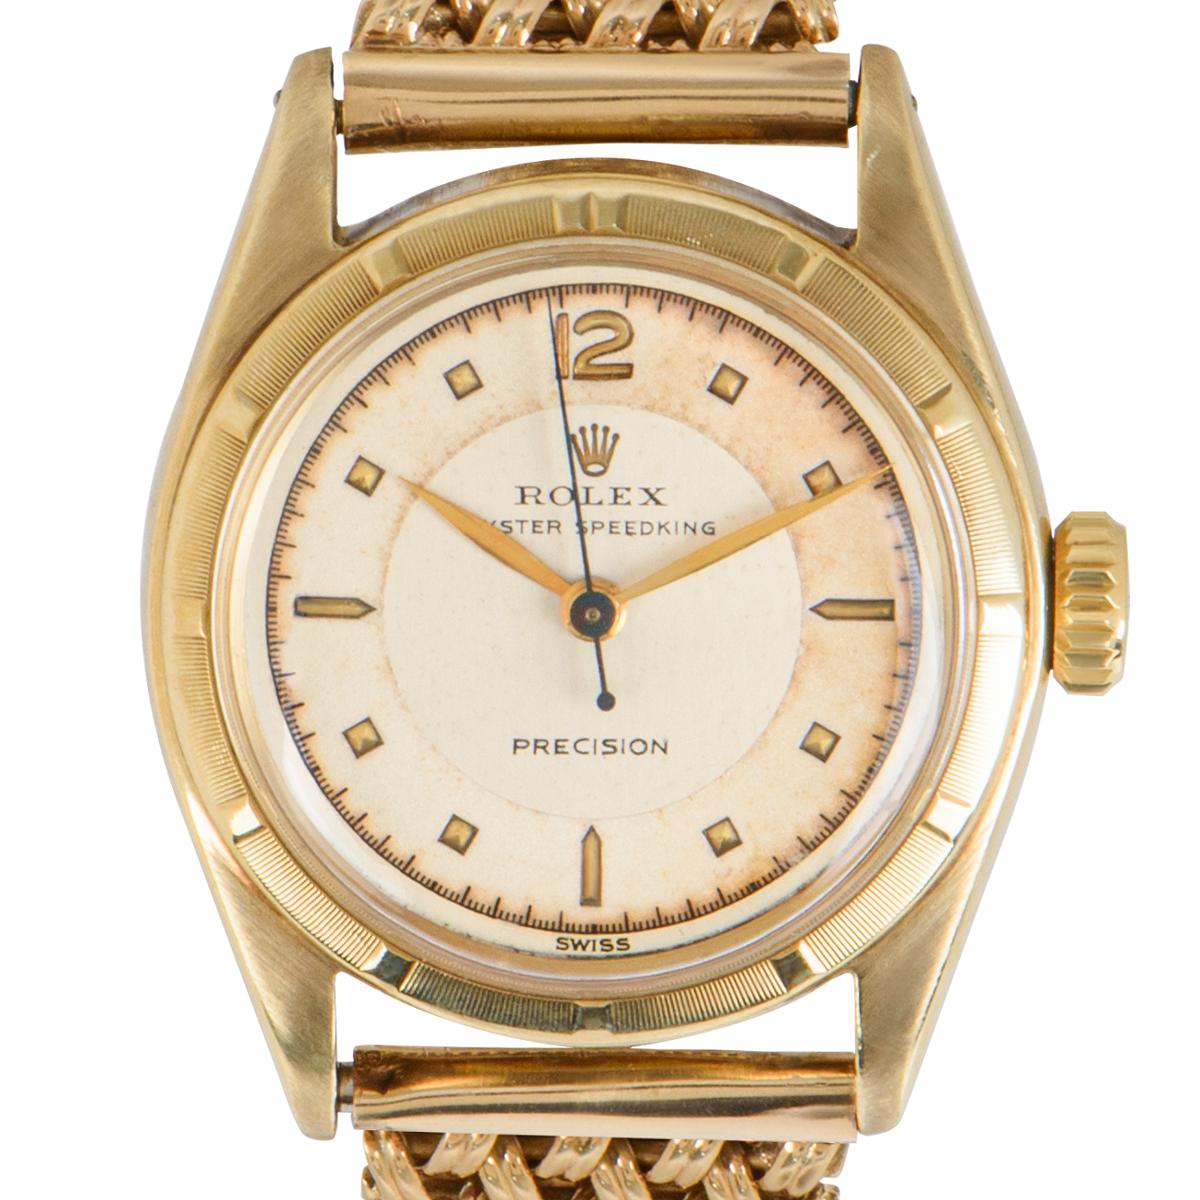 A mens mid-size Oyster Speedking Precision wristwatch in yellow gold by Rolex. Featuring a silver and cream dial with a fixed yellow gold bezel. Equipped with a 9k yellow gold bracelet (not from Rolex) set with a jewellery clasp. The watch is fitted